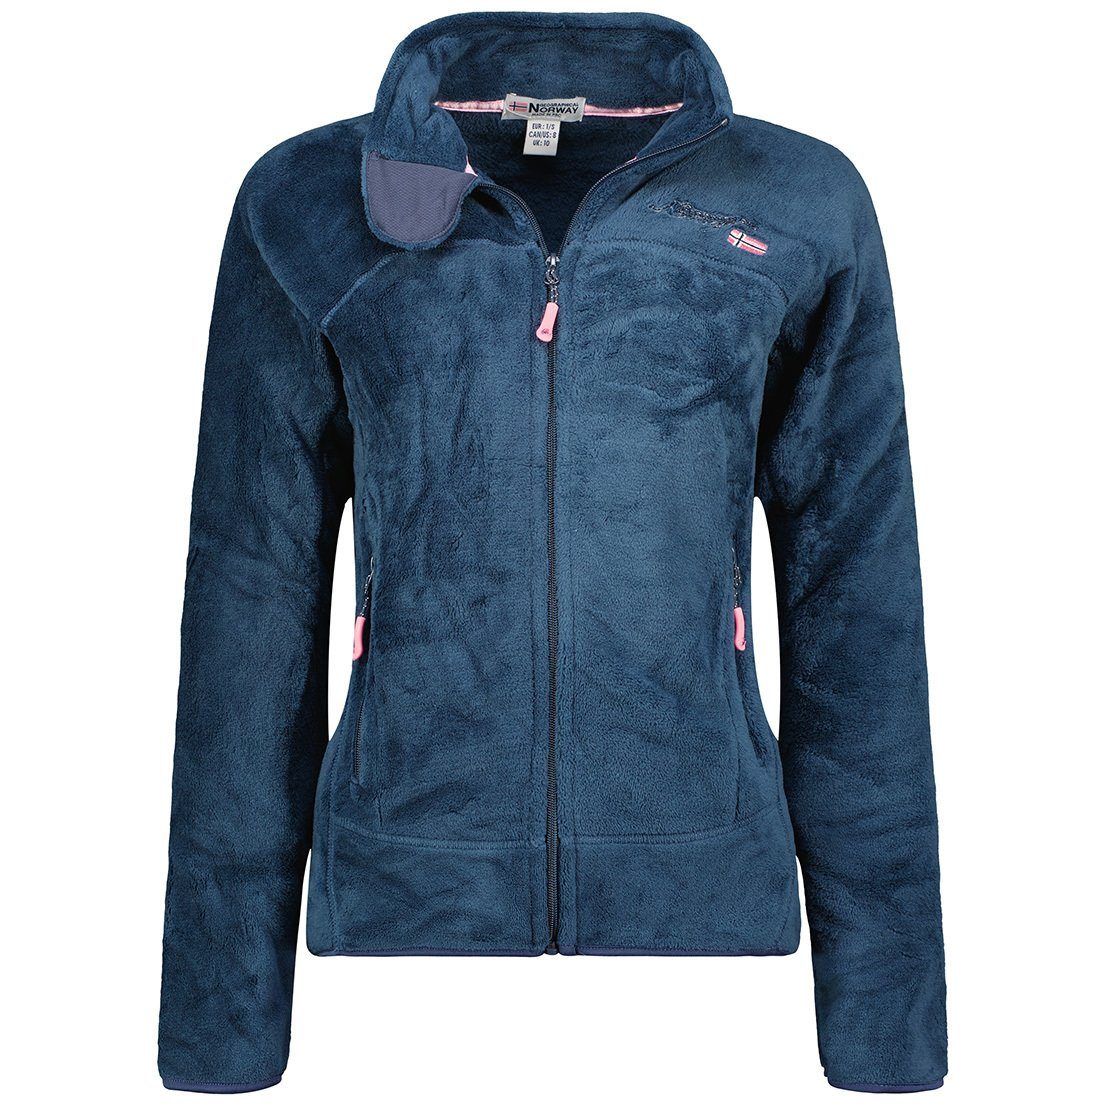 Navy Fleecejacke QUES Geographical / LADY Blau Norway Pink -